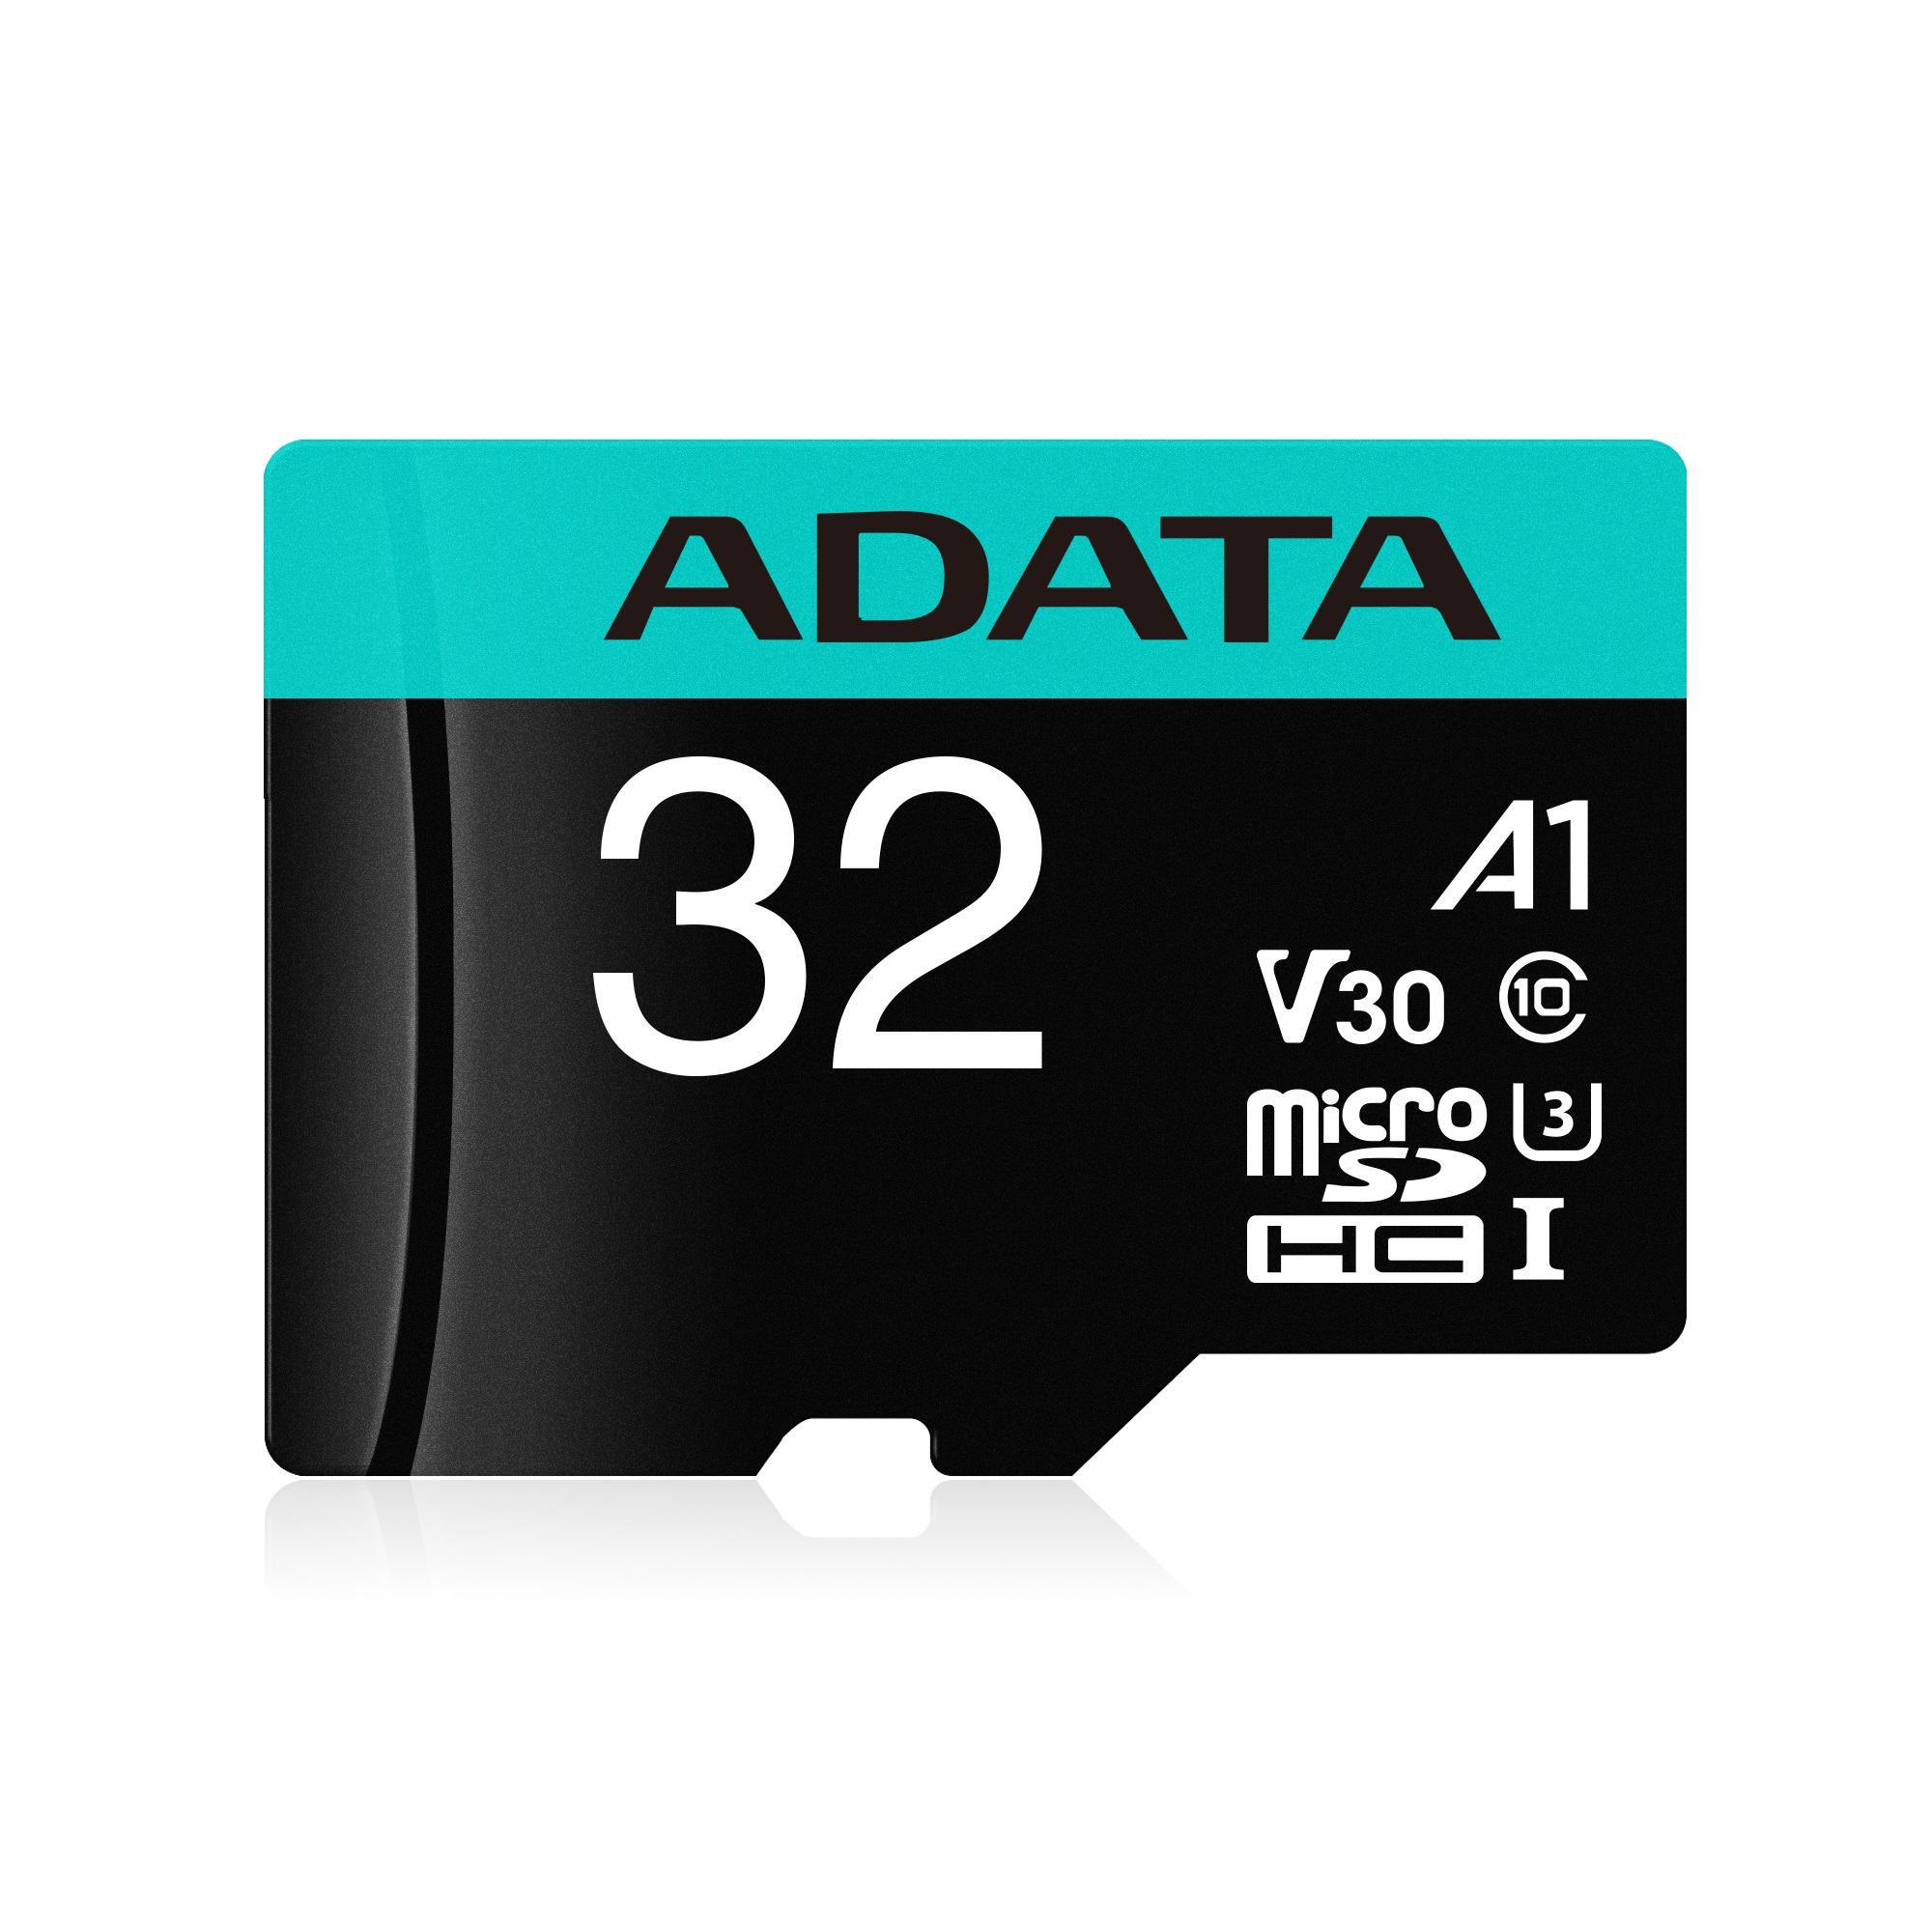 32GB AData Premier Pro microSDHC CL10 UHS-I U3 V30 A2 Memory Card with SD Adapter - image 1 of 4